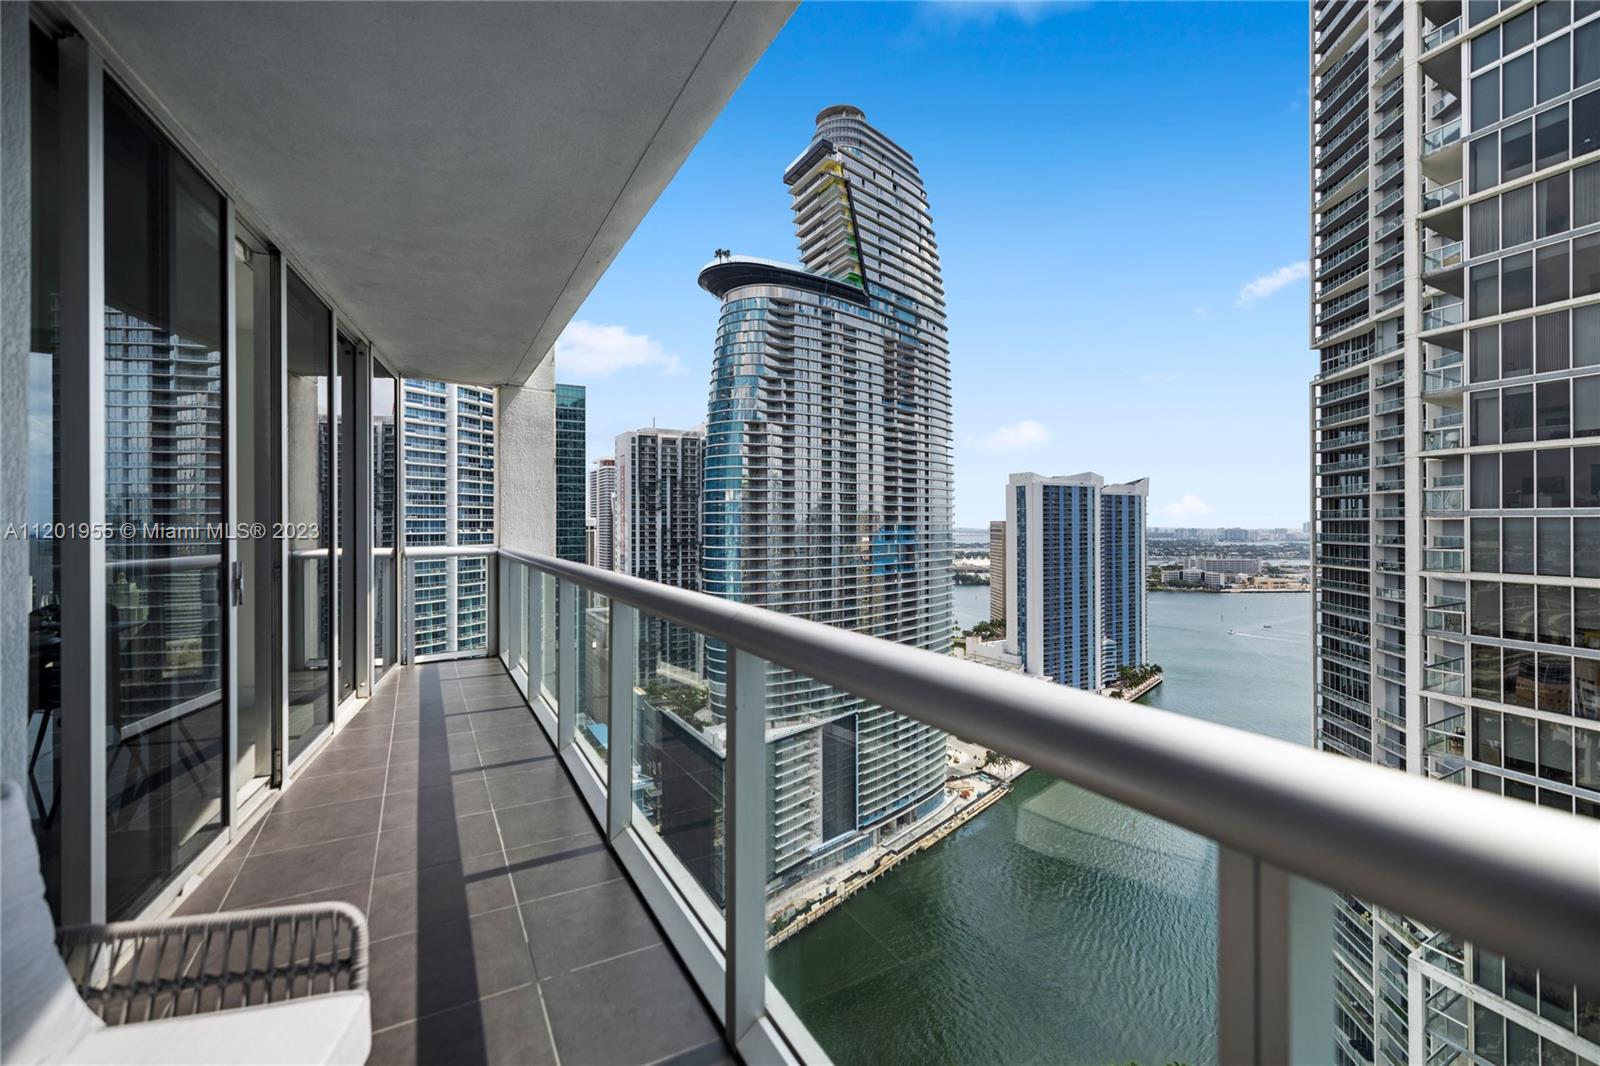 Welcome to Icon Brickell Tower 3, the most amazing corner unit with stunning views of the Biscayne Bay, Miami River and Brickell / Downtown Skyline. Featuring 2 bed / 2 bath 1,386 SQFT, custom made closets, beautiful kitchen with high end finishes and ample space for entertainment. Take advantage of short term rental allowance via AIRBNB, VRBO or comparable. Located in the heart of Brickell, Miami’s financial district and few blocks away from banks, restaurants, supermarkets and Brickell City Center. Great opportunity for investors! Icon Brickell offers state of the art amenities including exercise room, billiard room, business center, theater, heated lap pool, spa, community room, child play area, 24 hour security, valet parking and more! Call Listing Agent for showings and information!